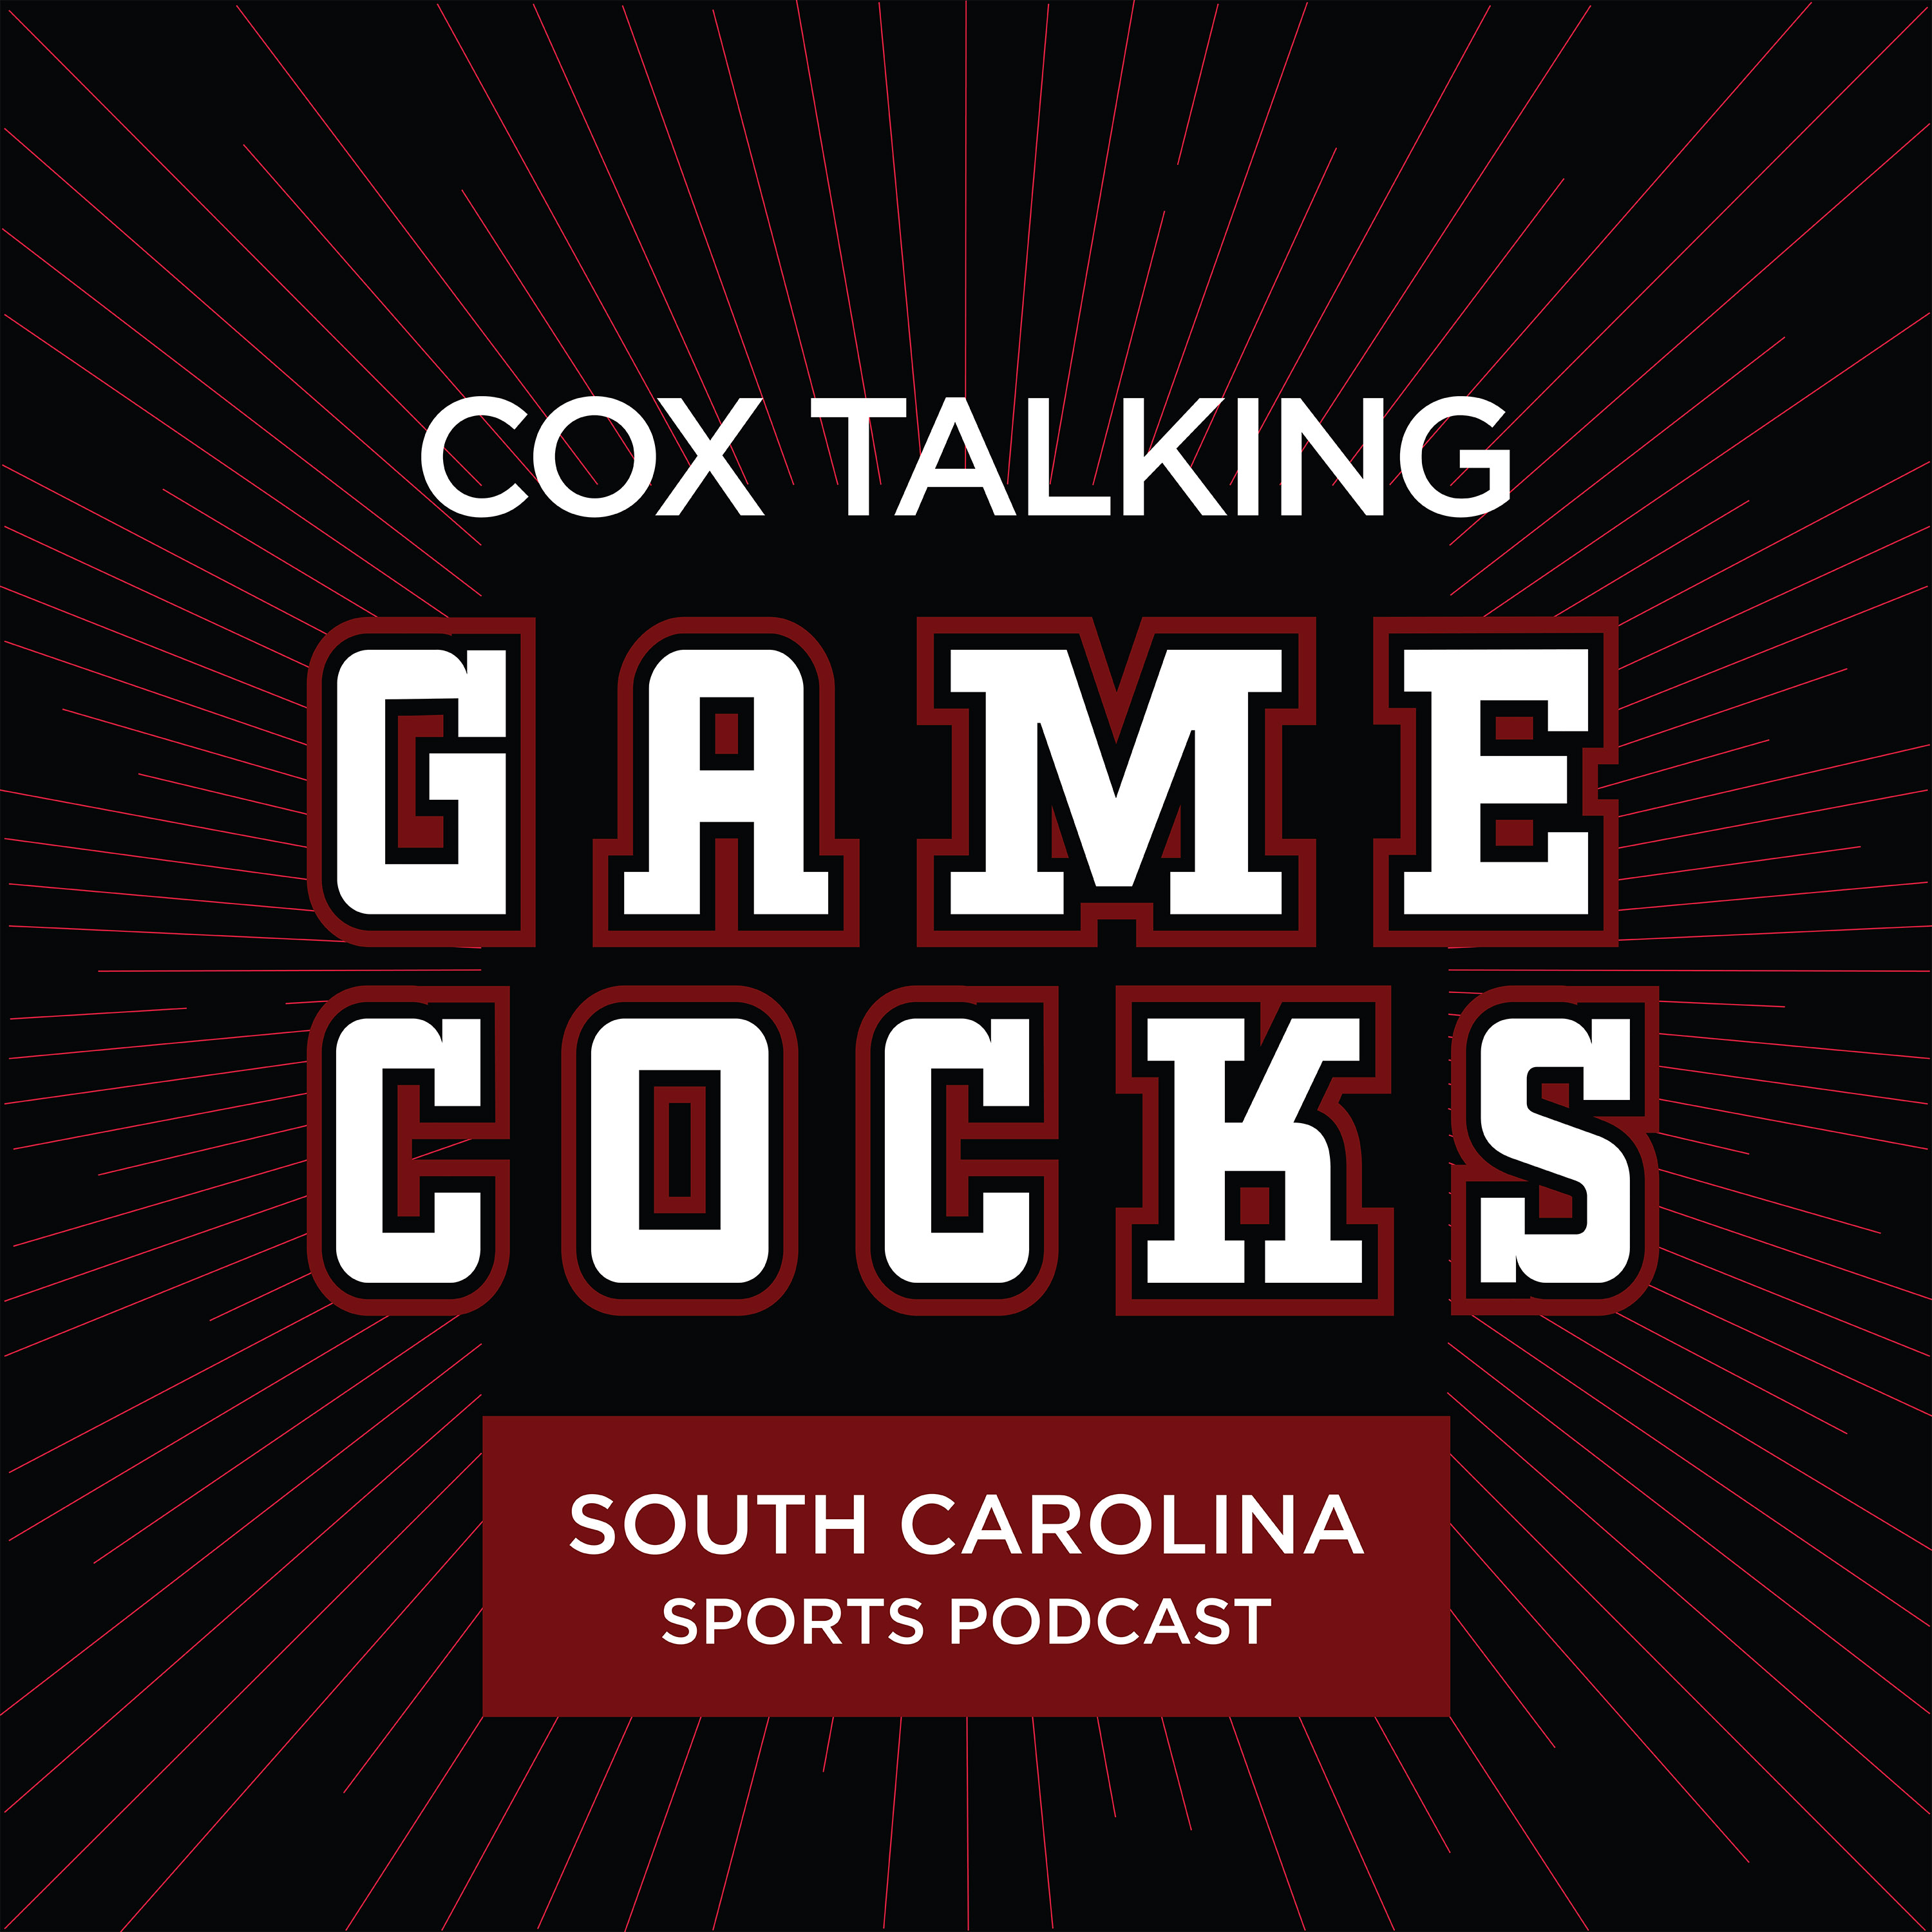 Gamecocks Secure First SEC Win of Season, Postgame Reaction and Analysis + Weekend Athletics Recap